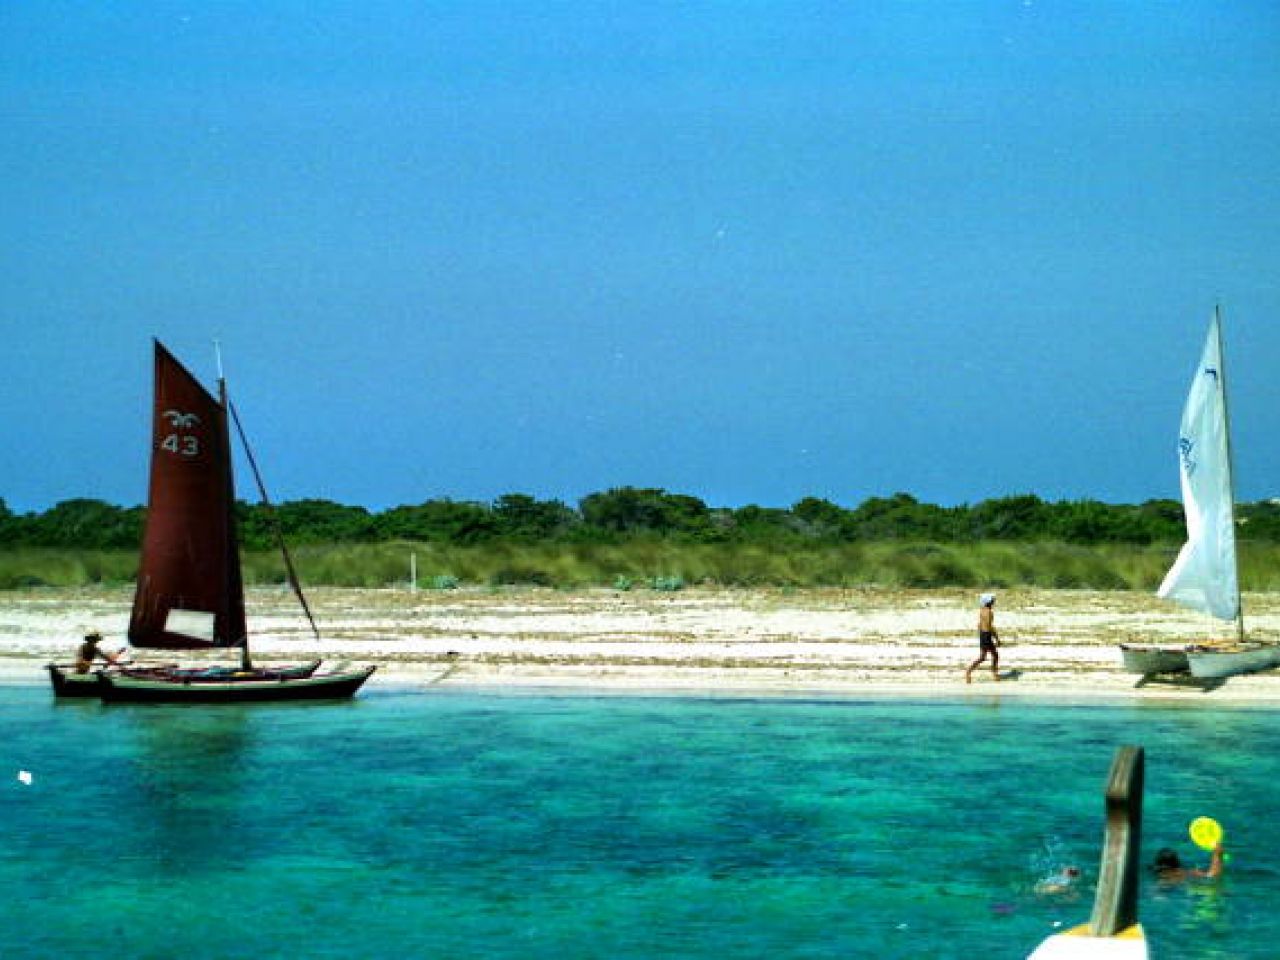 Two small catamarans just off the shore next to a beach